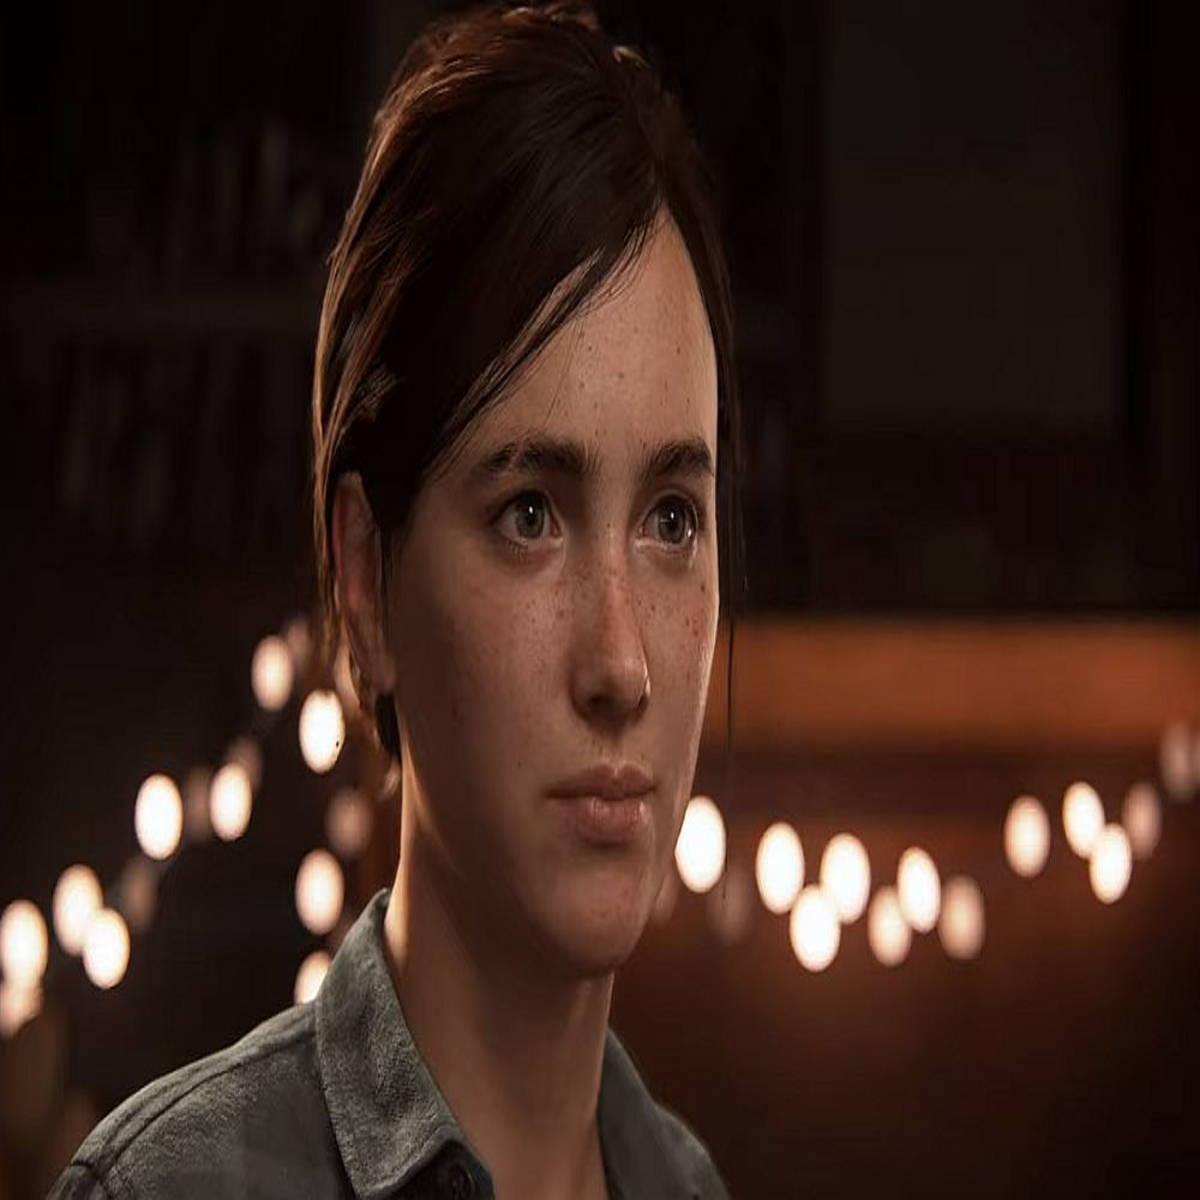 The Last of Us 2 enhanced on PS5 with Adaptive Triggers